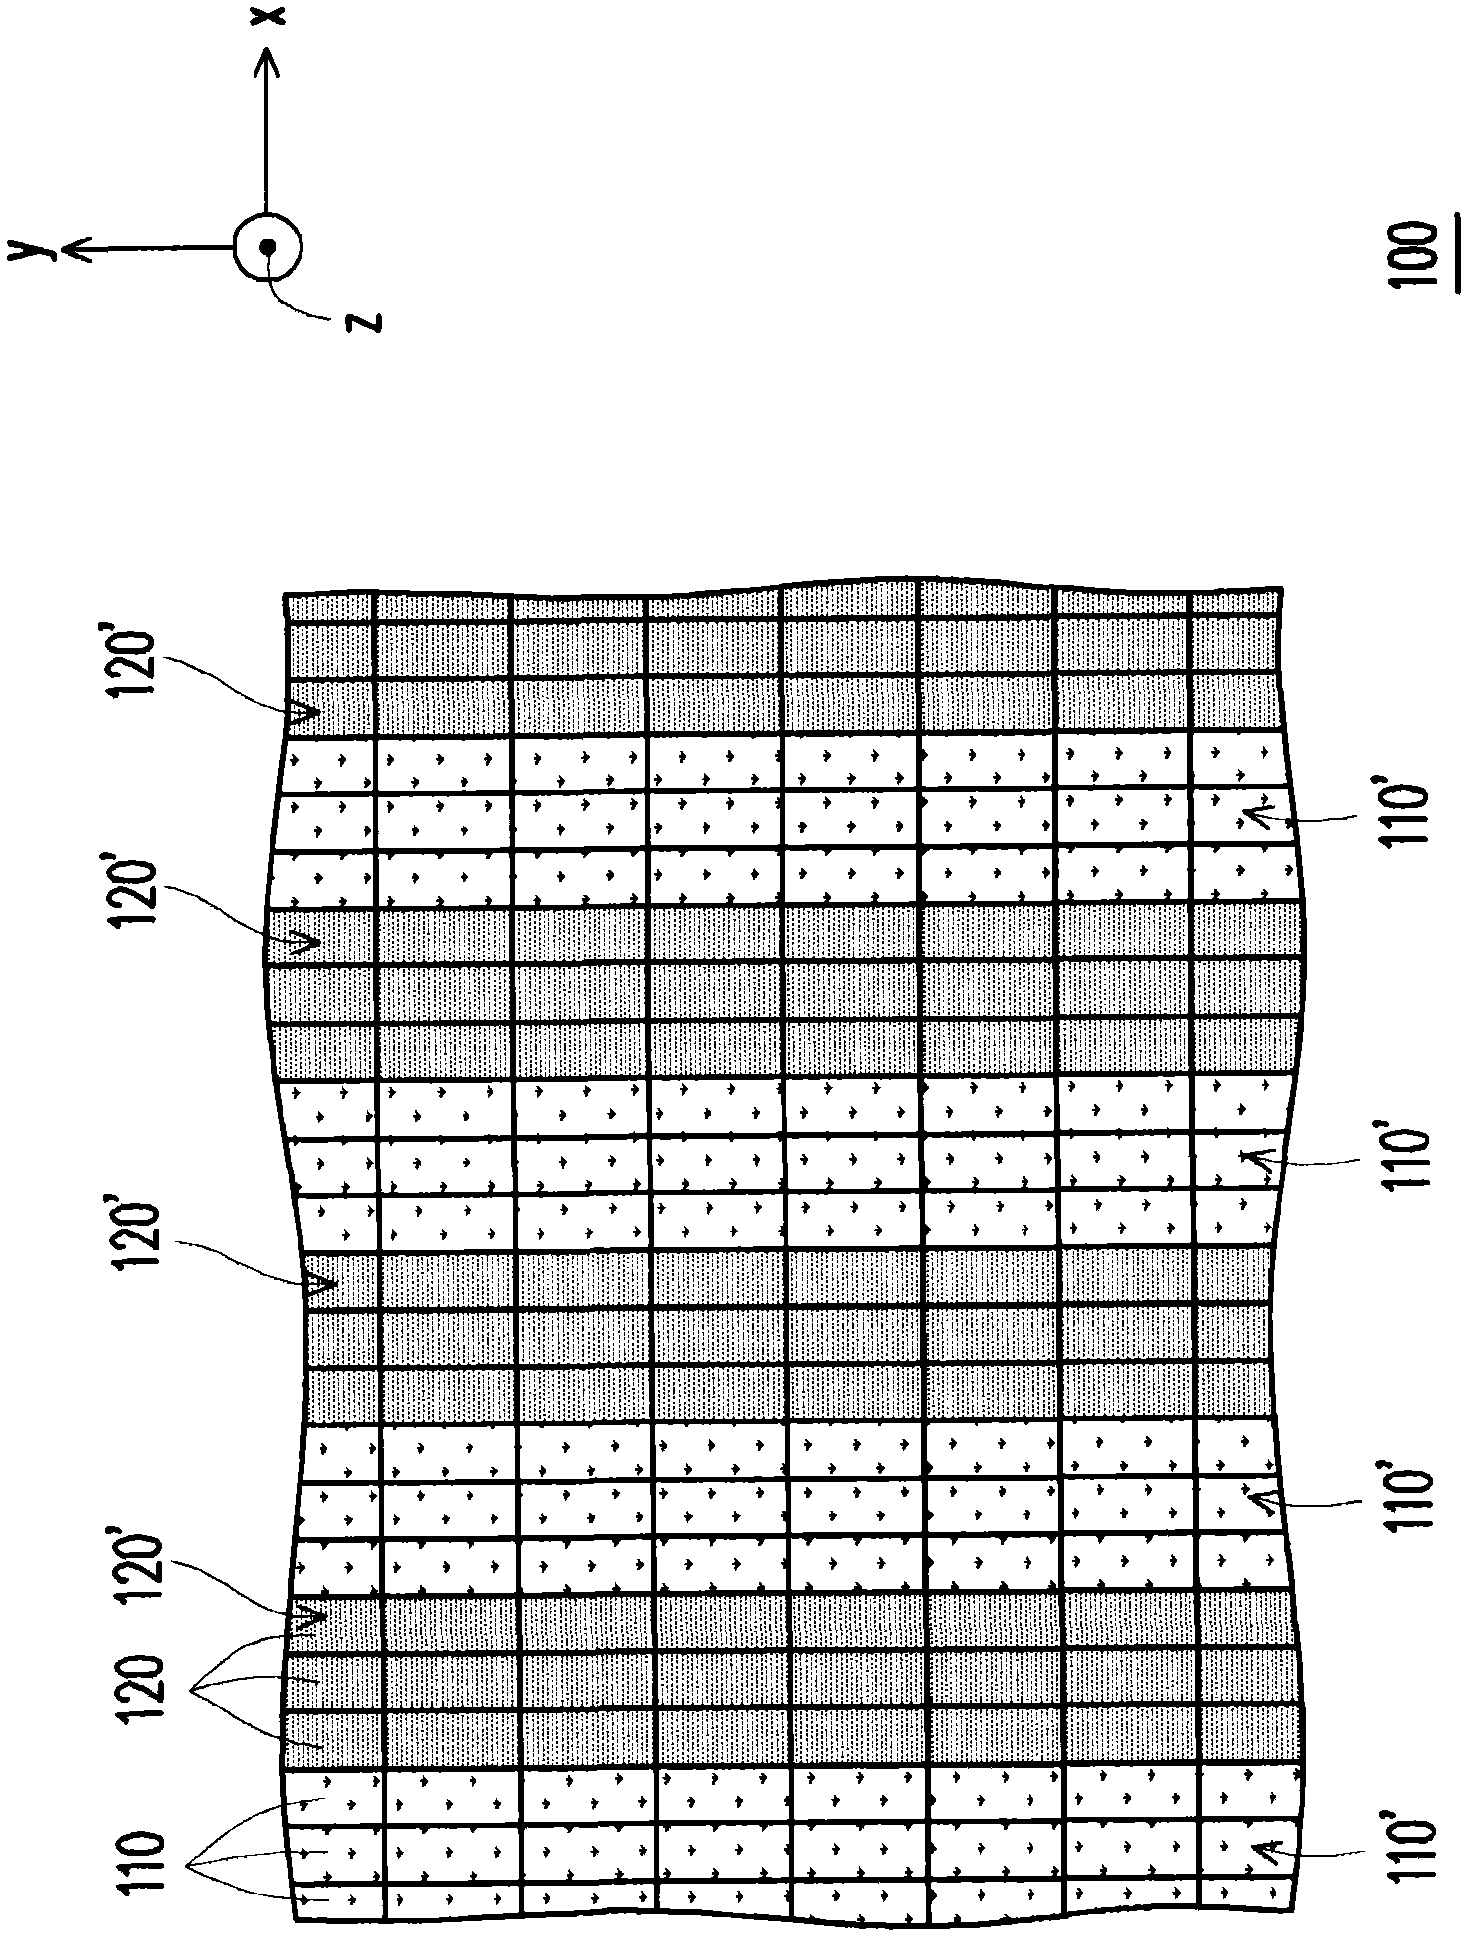 Touch control display device